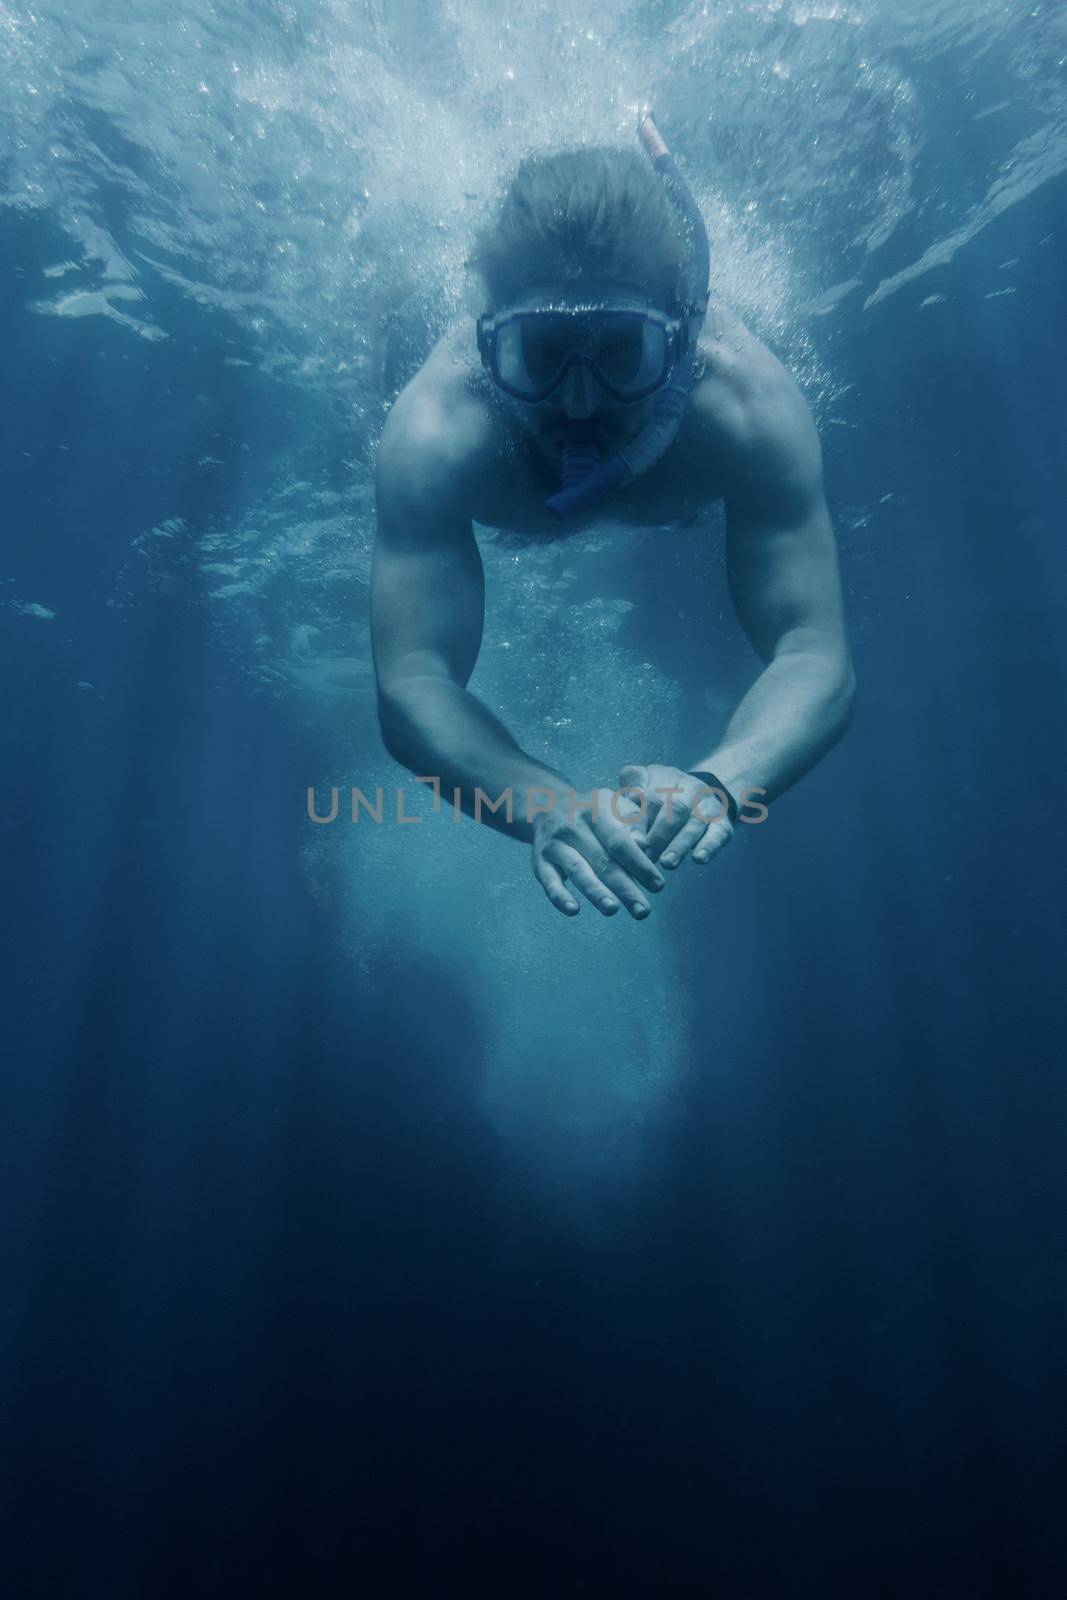 Young man in scuba mask diving underwater sea surface. Copy-space in down part of image.